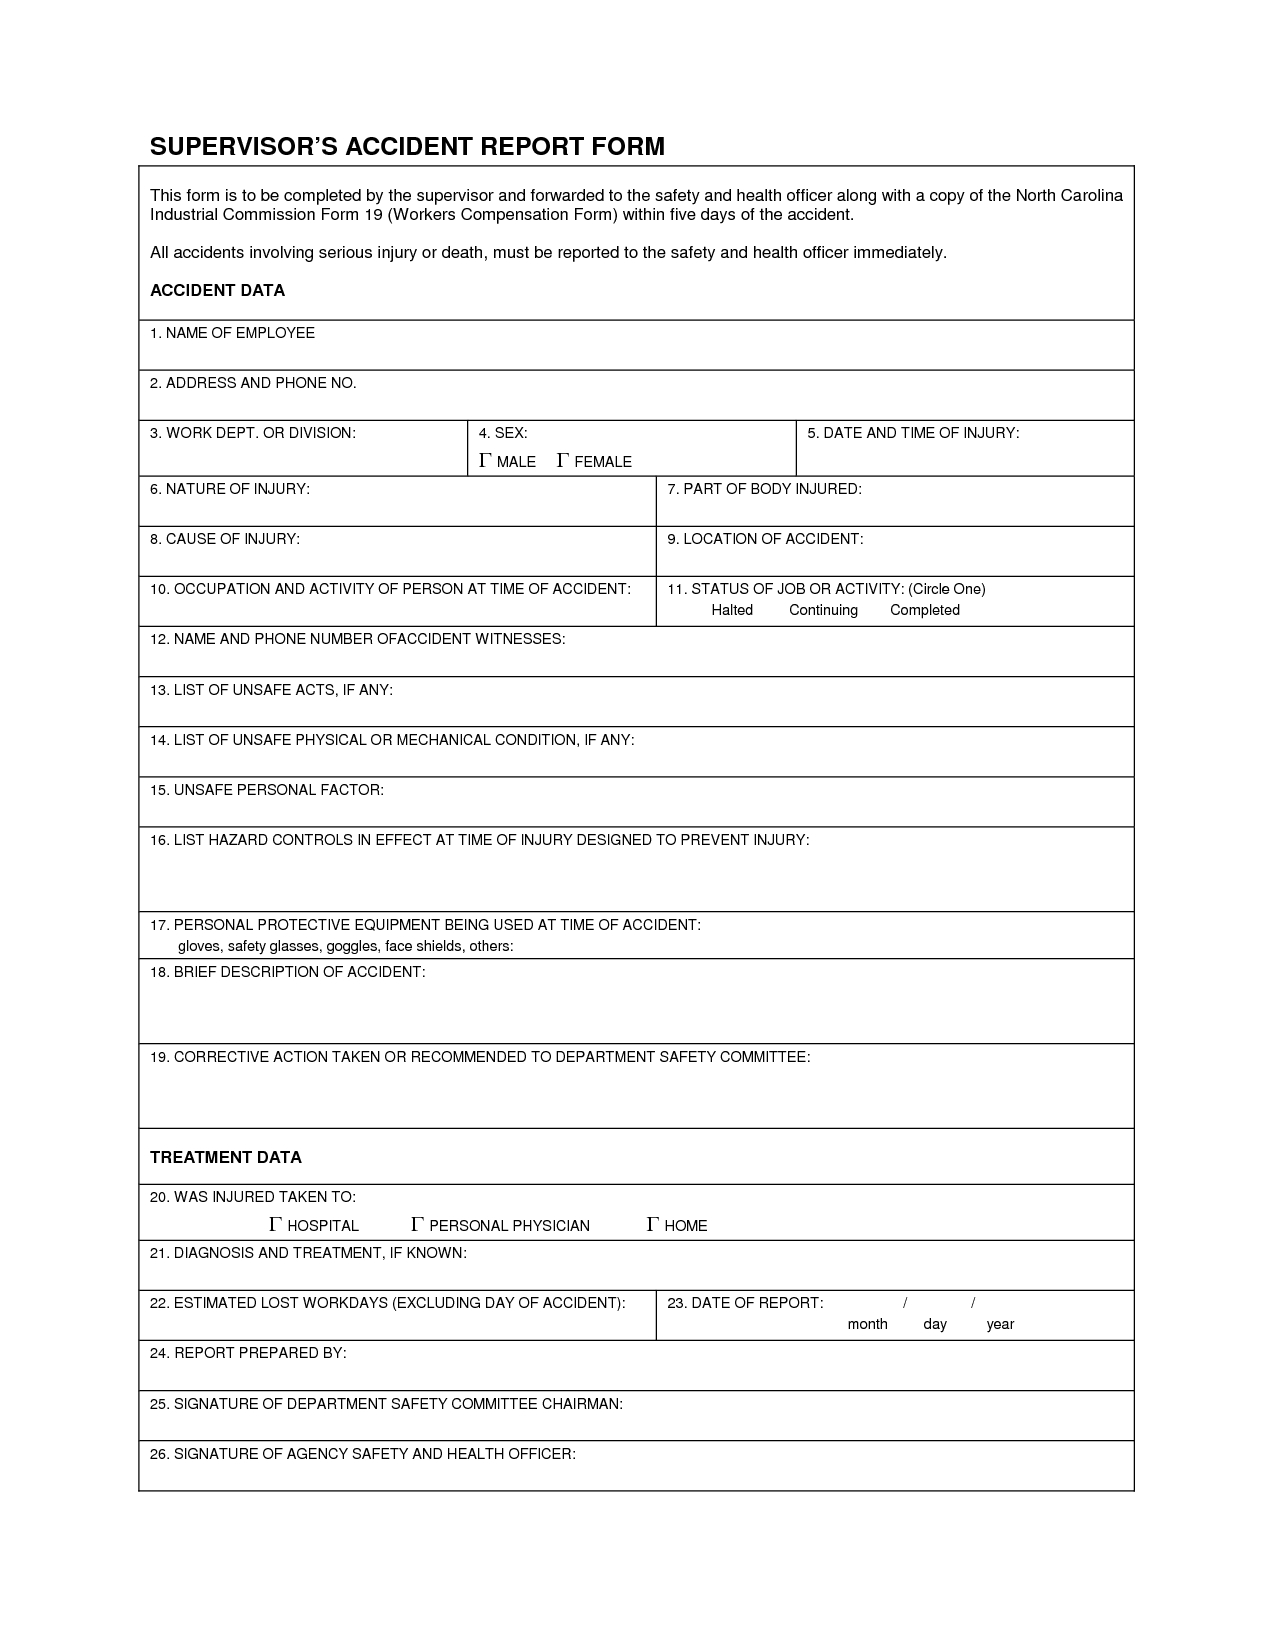 Industrial Accident Report Form Template | Supervisor's For Hazard Incident Report Form Template